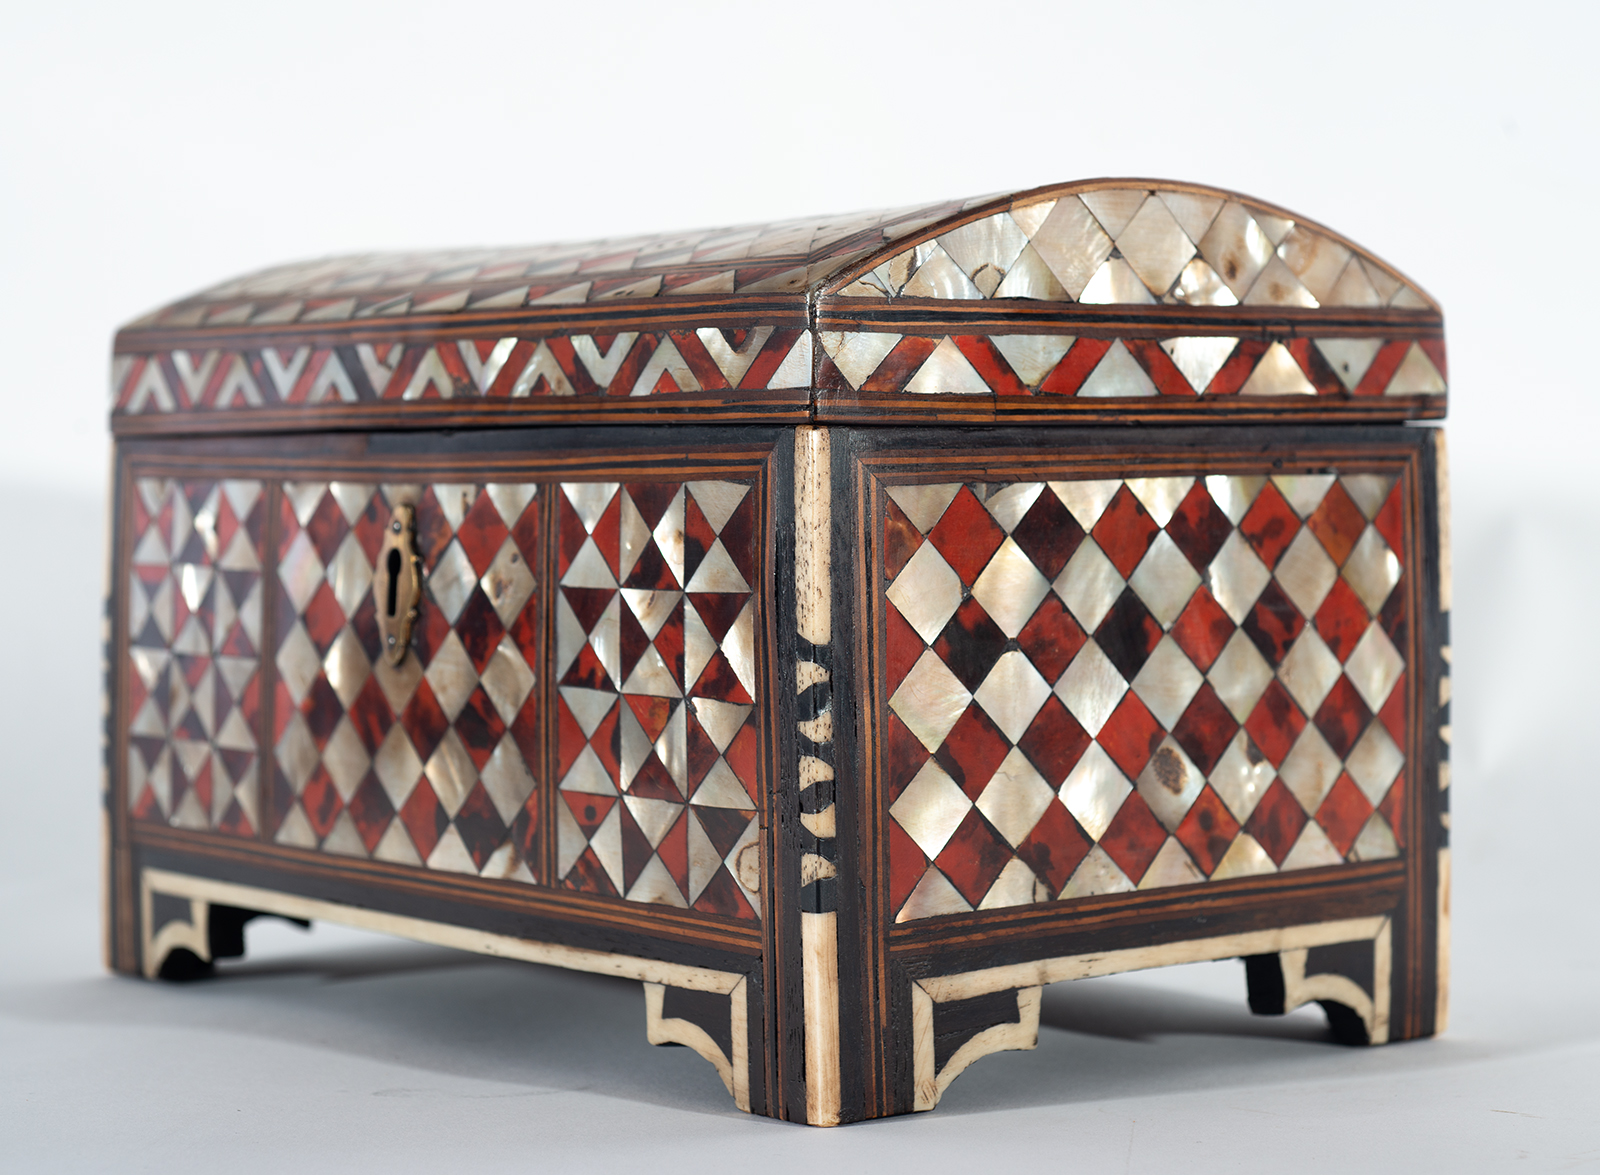 Important Ottoman chest in ebony, rosewood, mother-of-pearl and tortoiseshell, Turkey, 18th century - Image 3 of 5